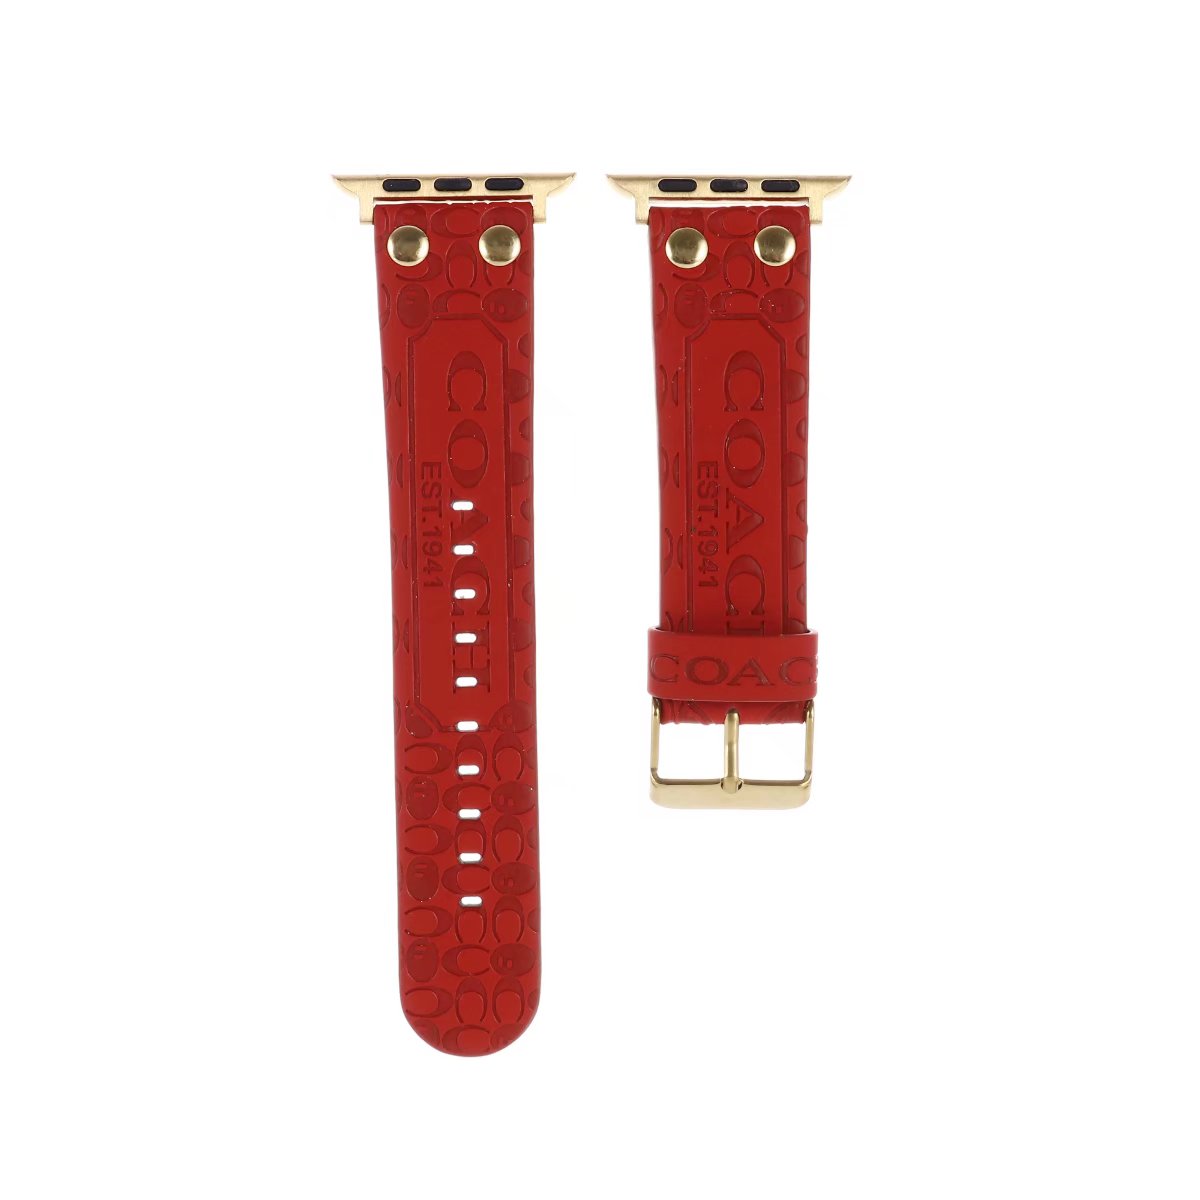 Debossed Coach Watch Band in red